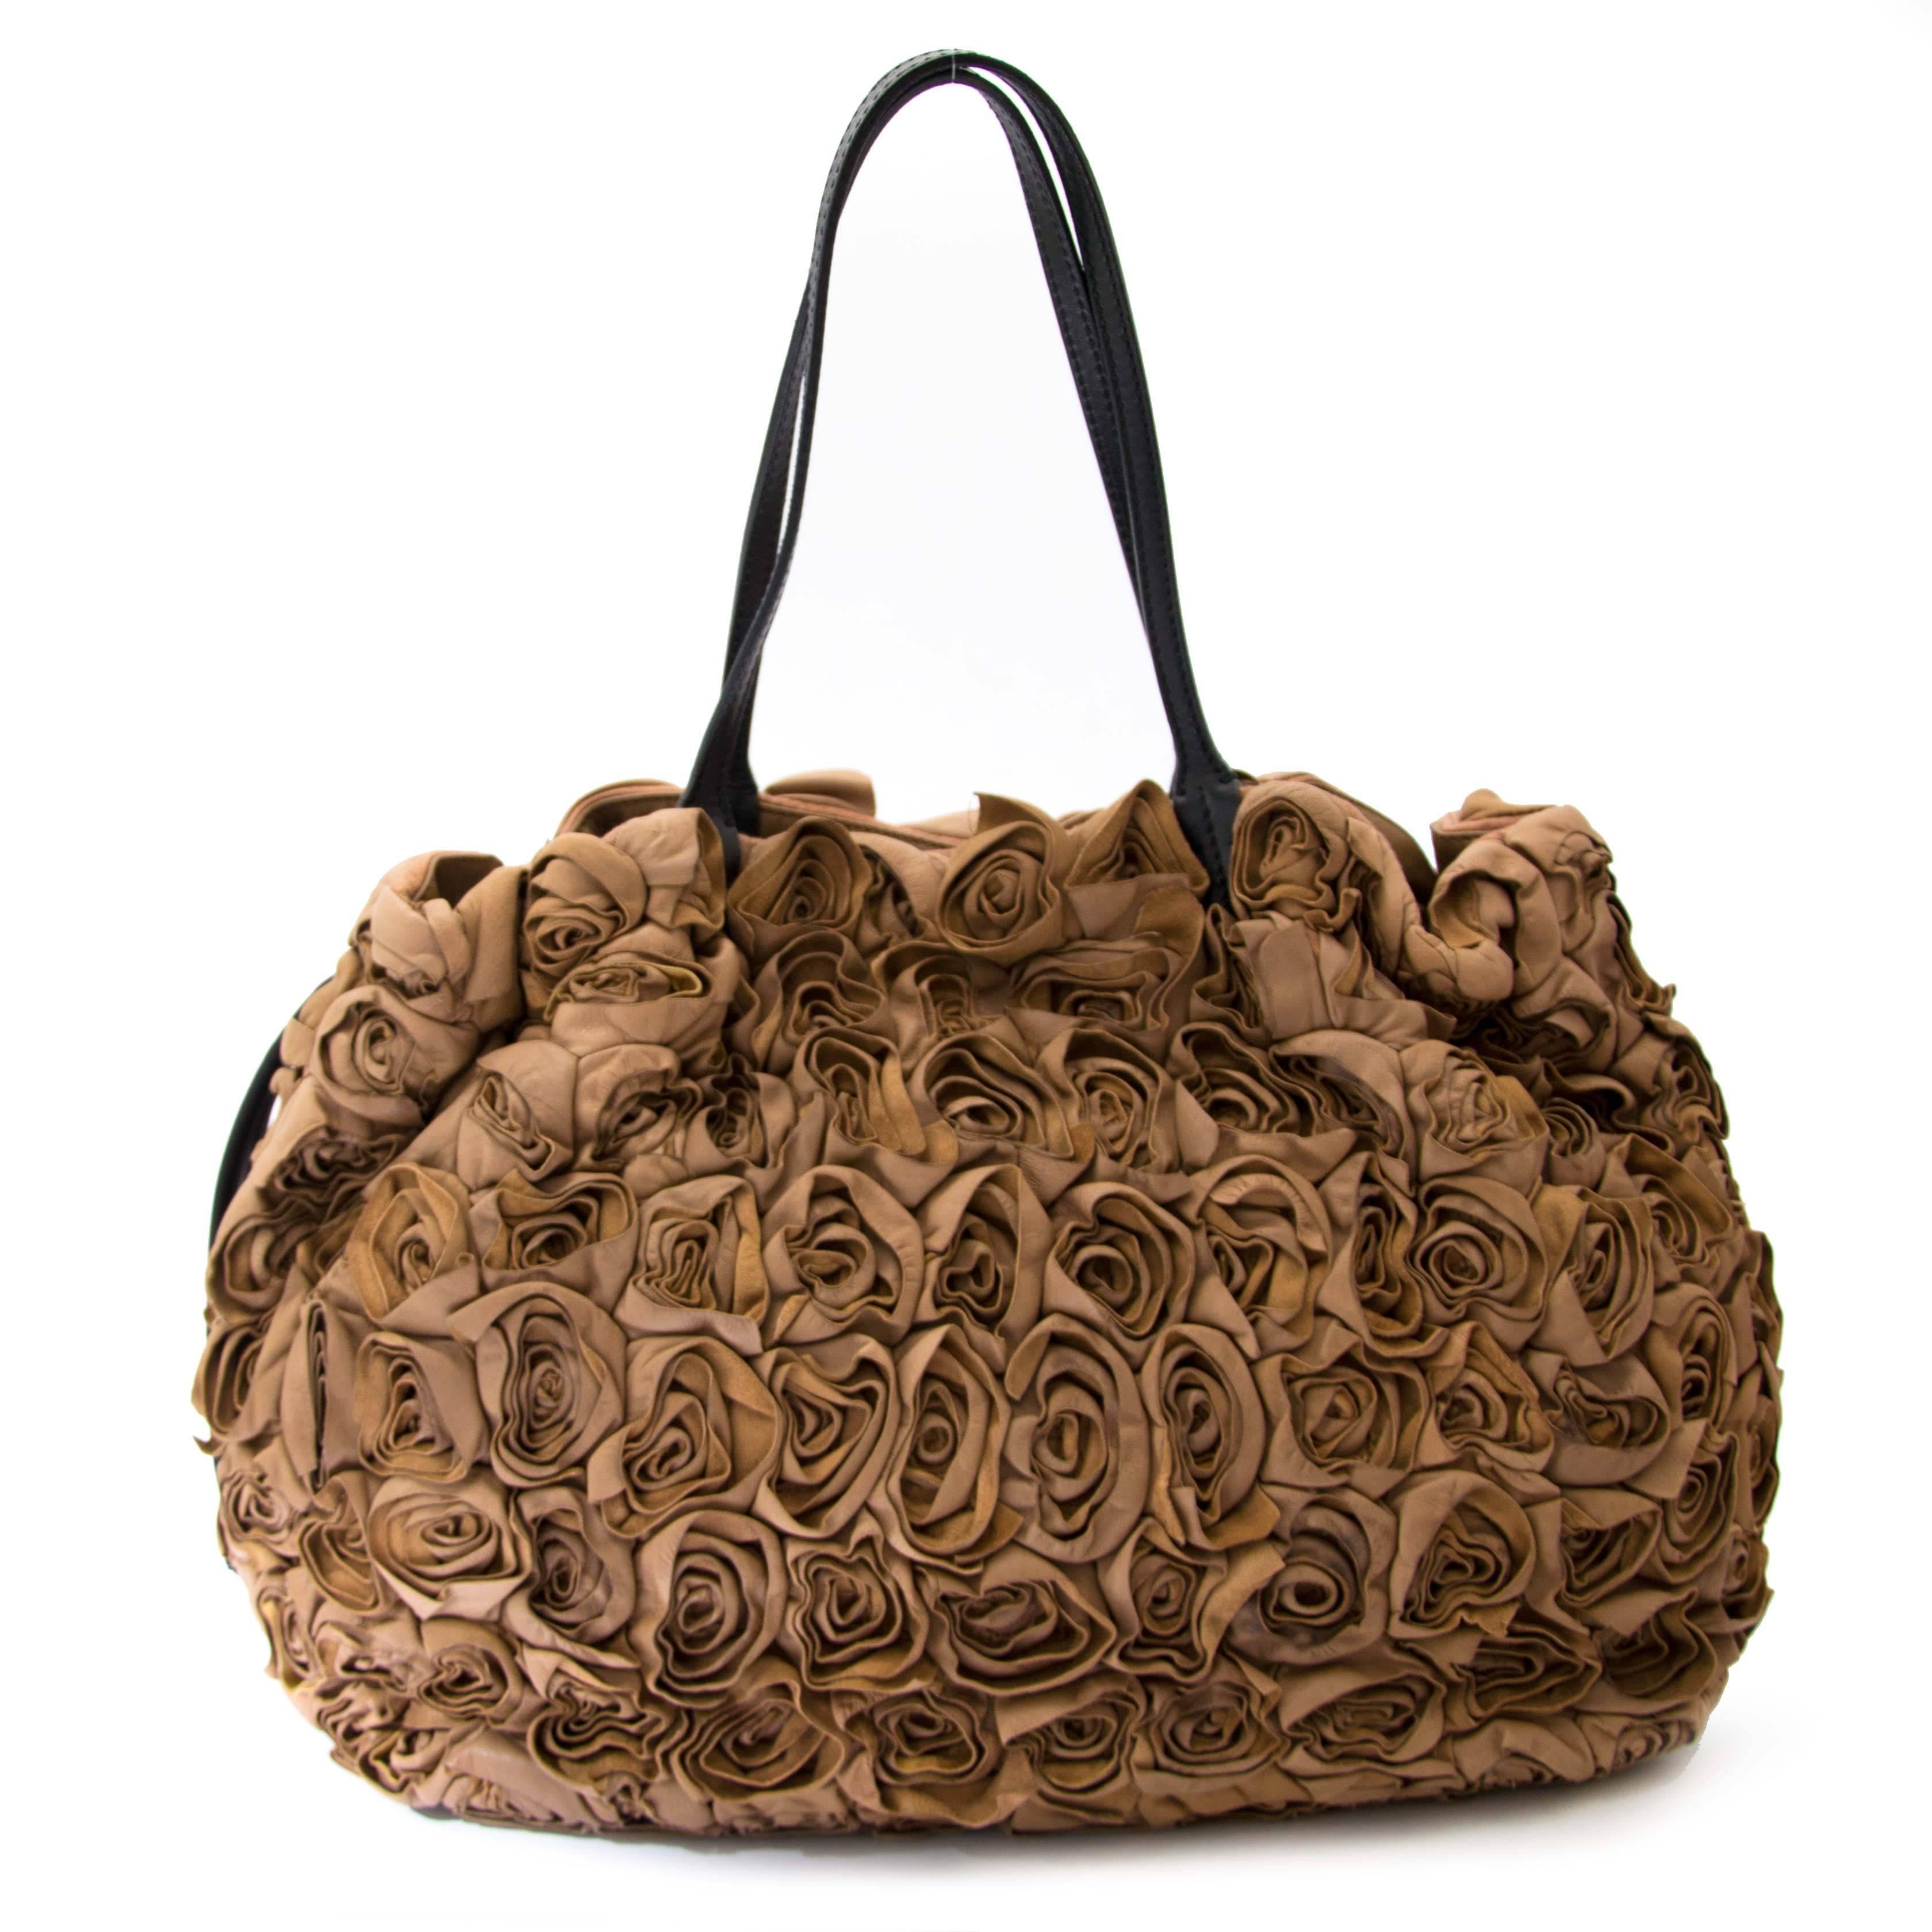 Very good condition

Valentino Taupe Leather Floral Rosette Oversized Bag

This distinctive shoulder bag features all over leathe rosette applications and contrasting black leather shoulder straps.

Gold toned logo placque on the front.

Comes